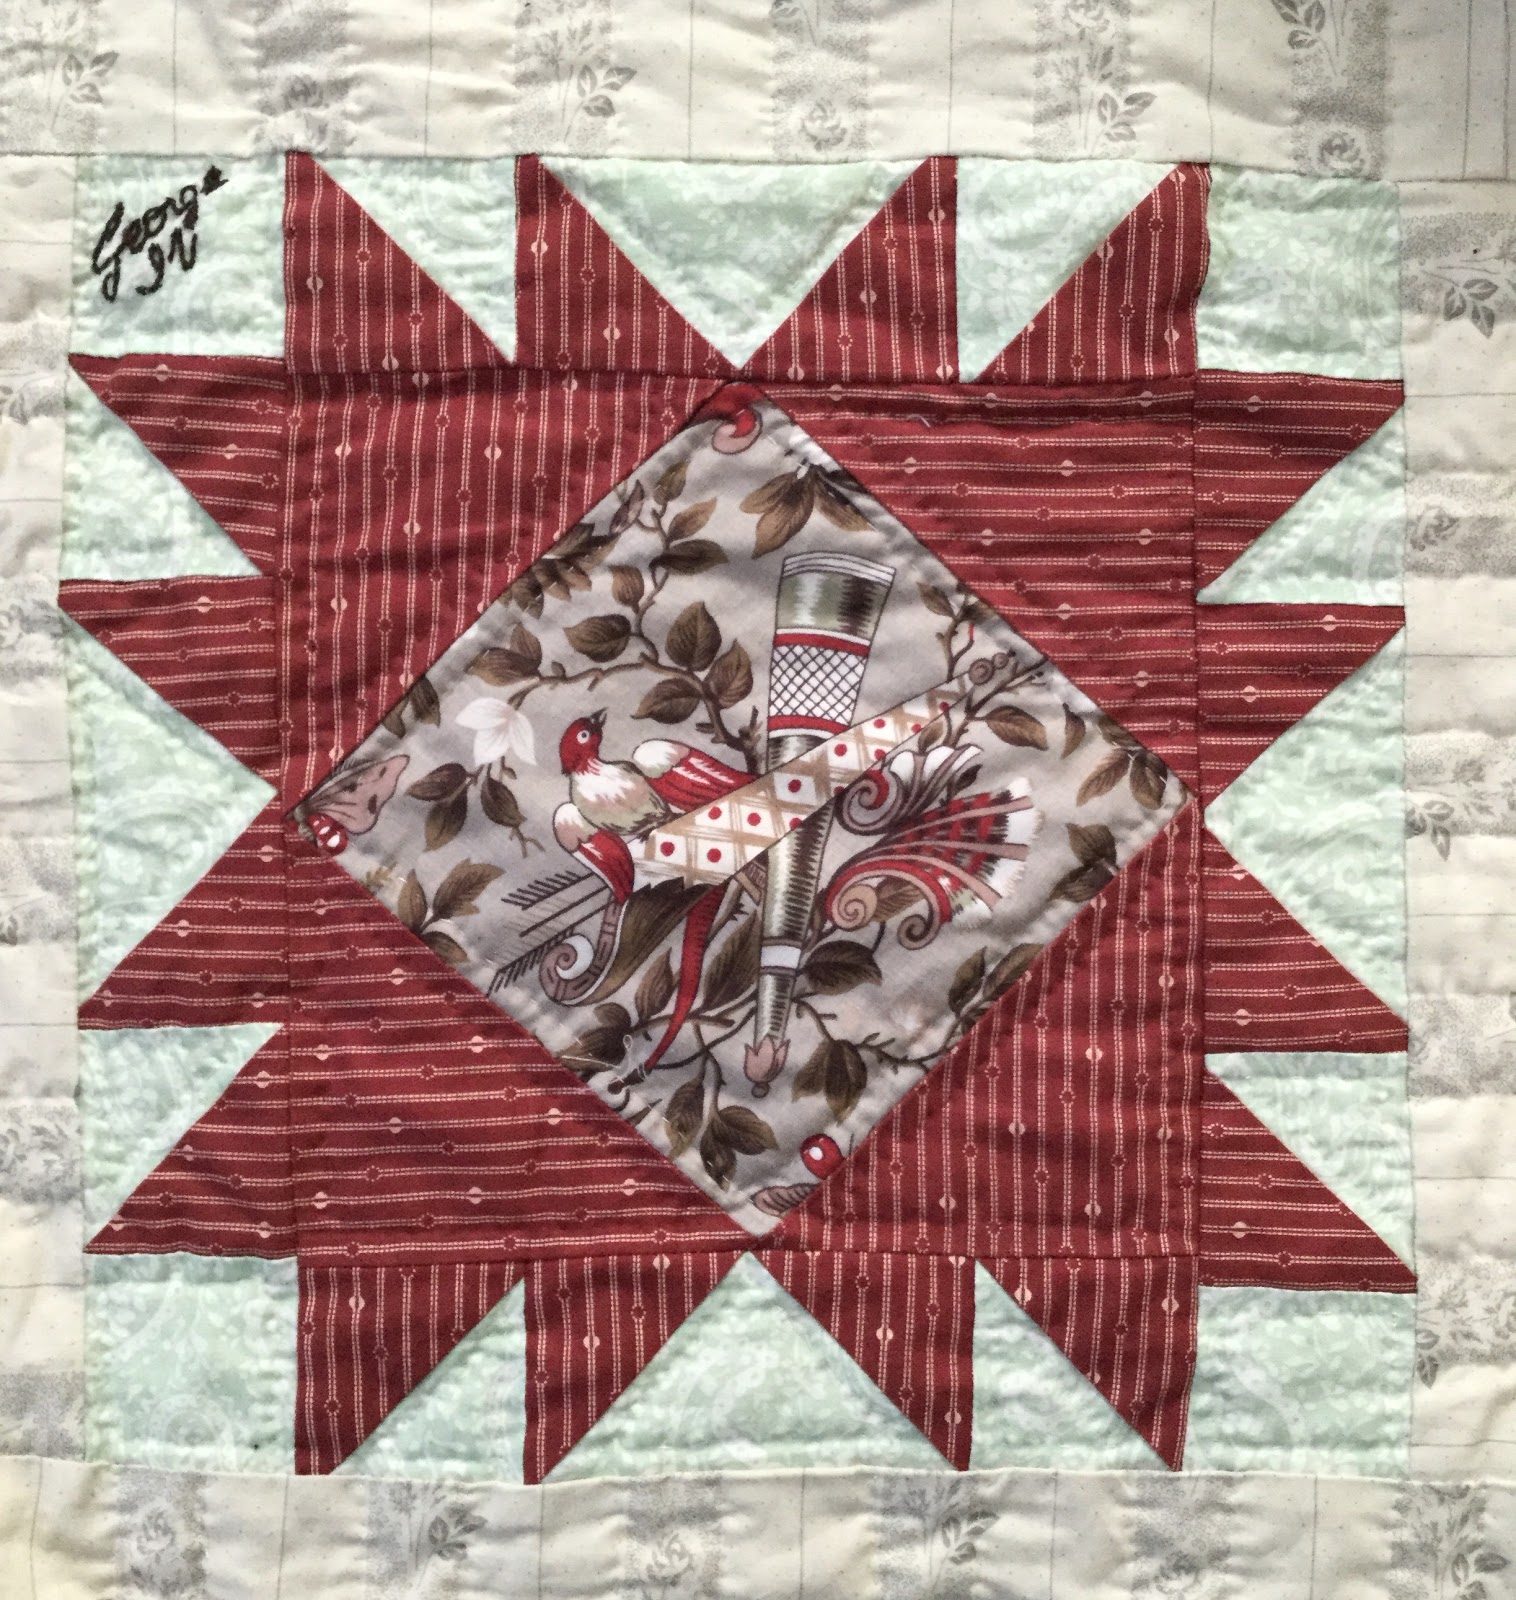 Quilting Land: Jane's Binding Tool Star Quilt